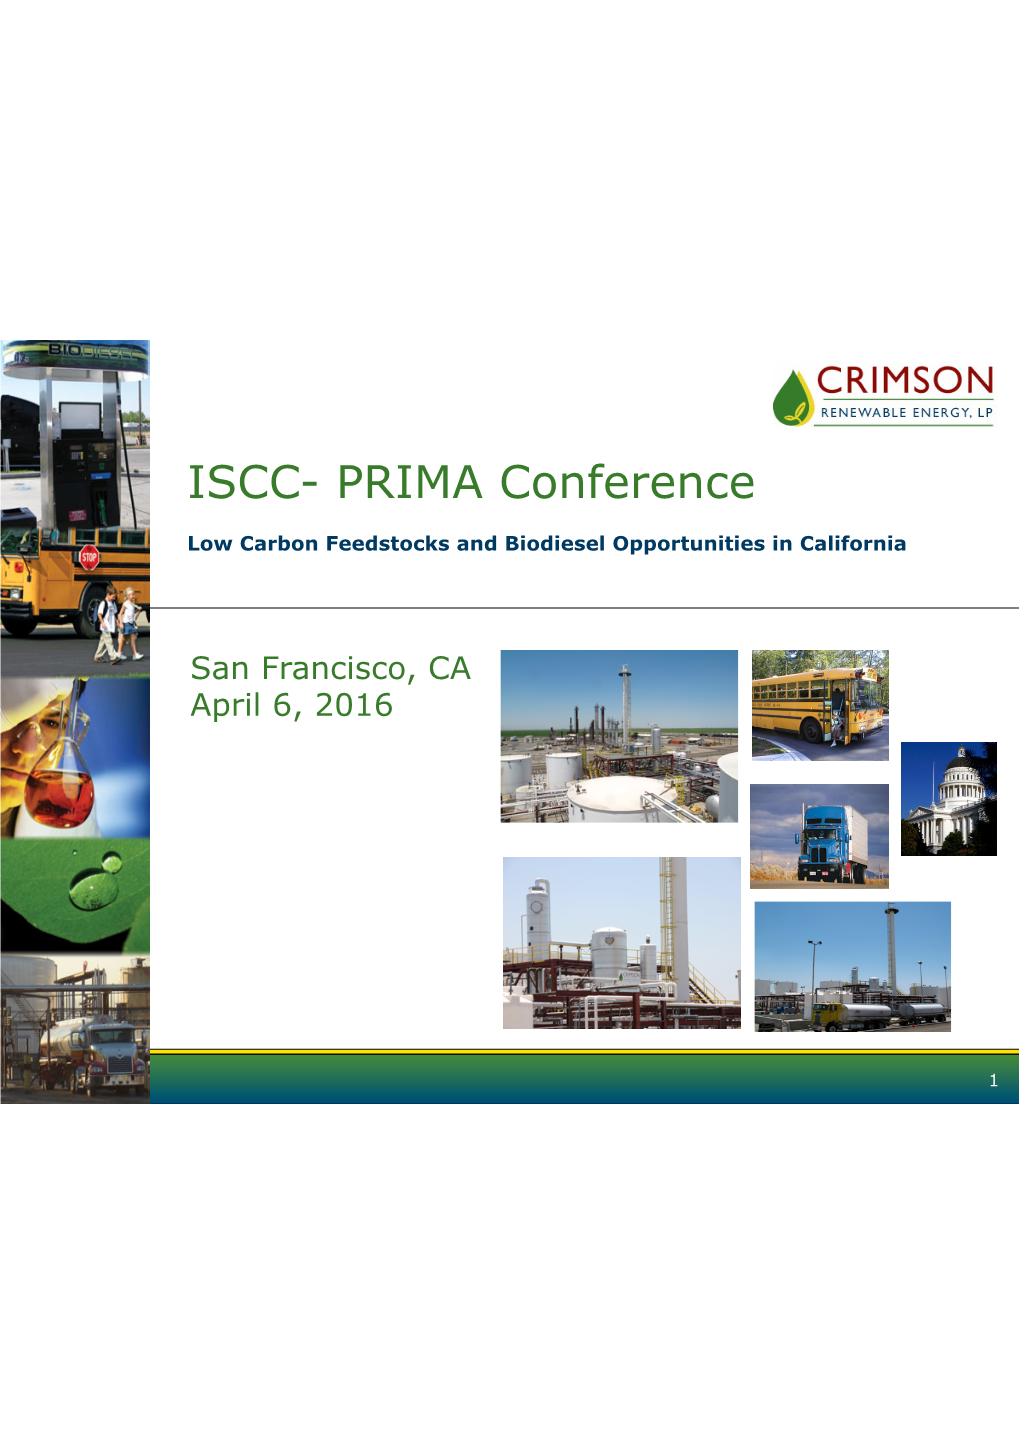 Low Carbon Feedstocks and Biodiesel Opportunities in California